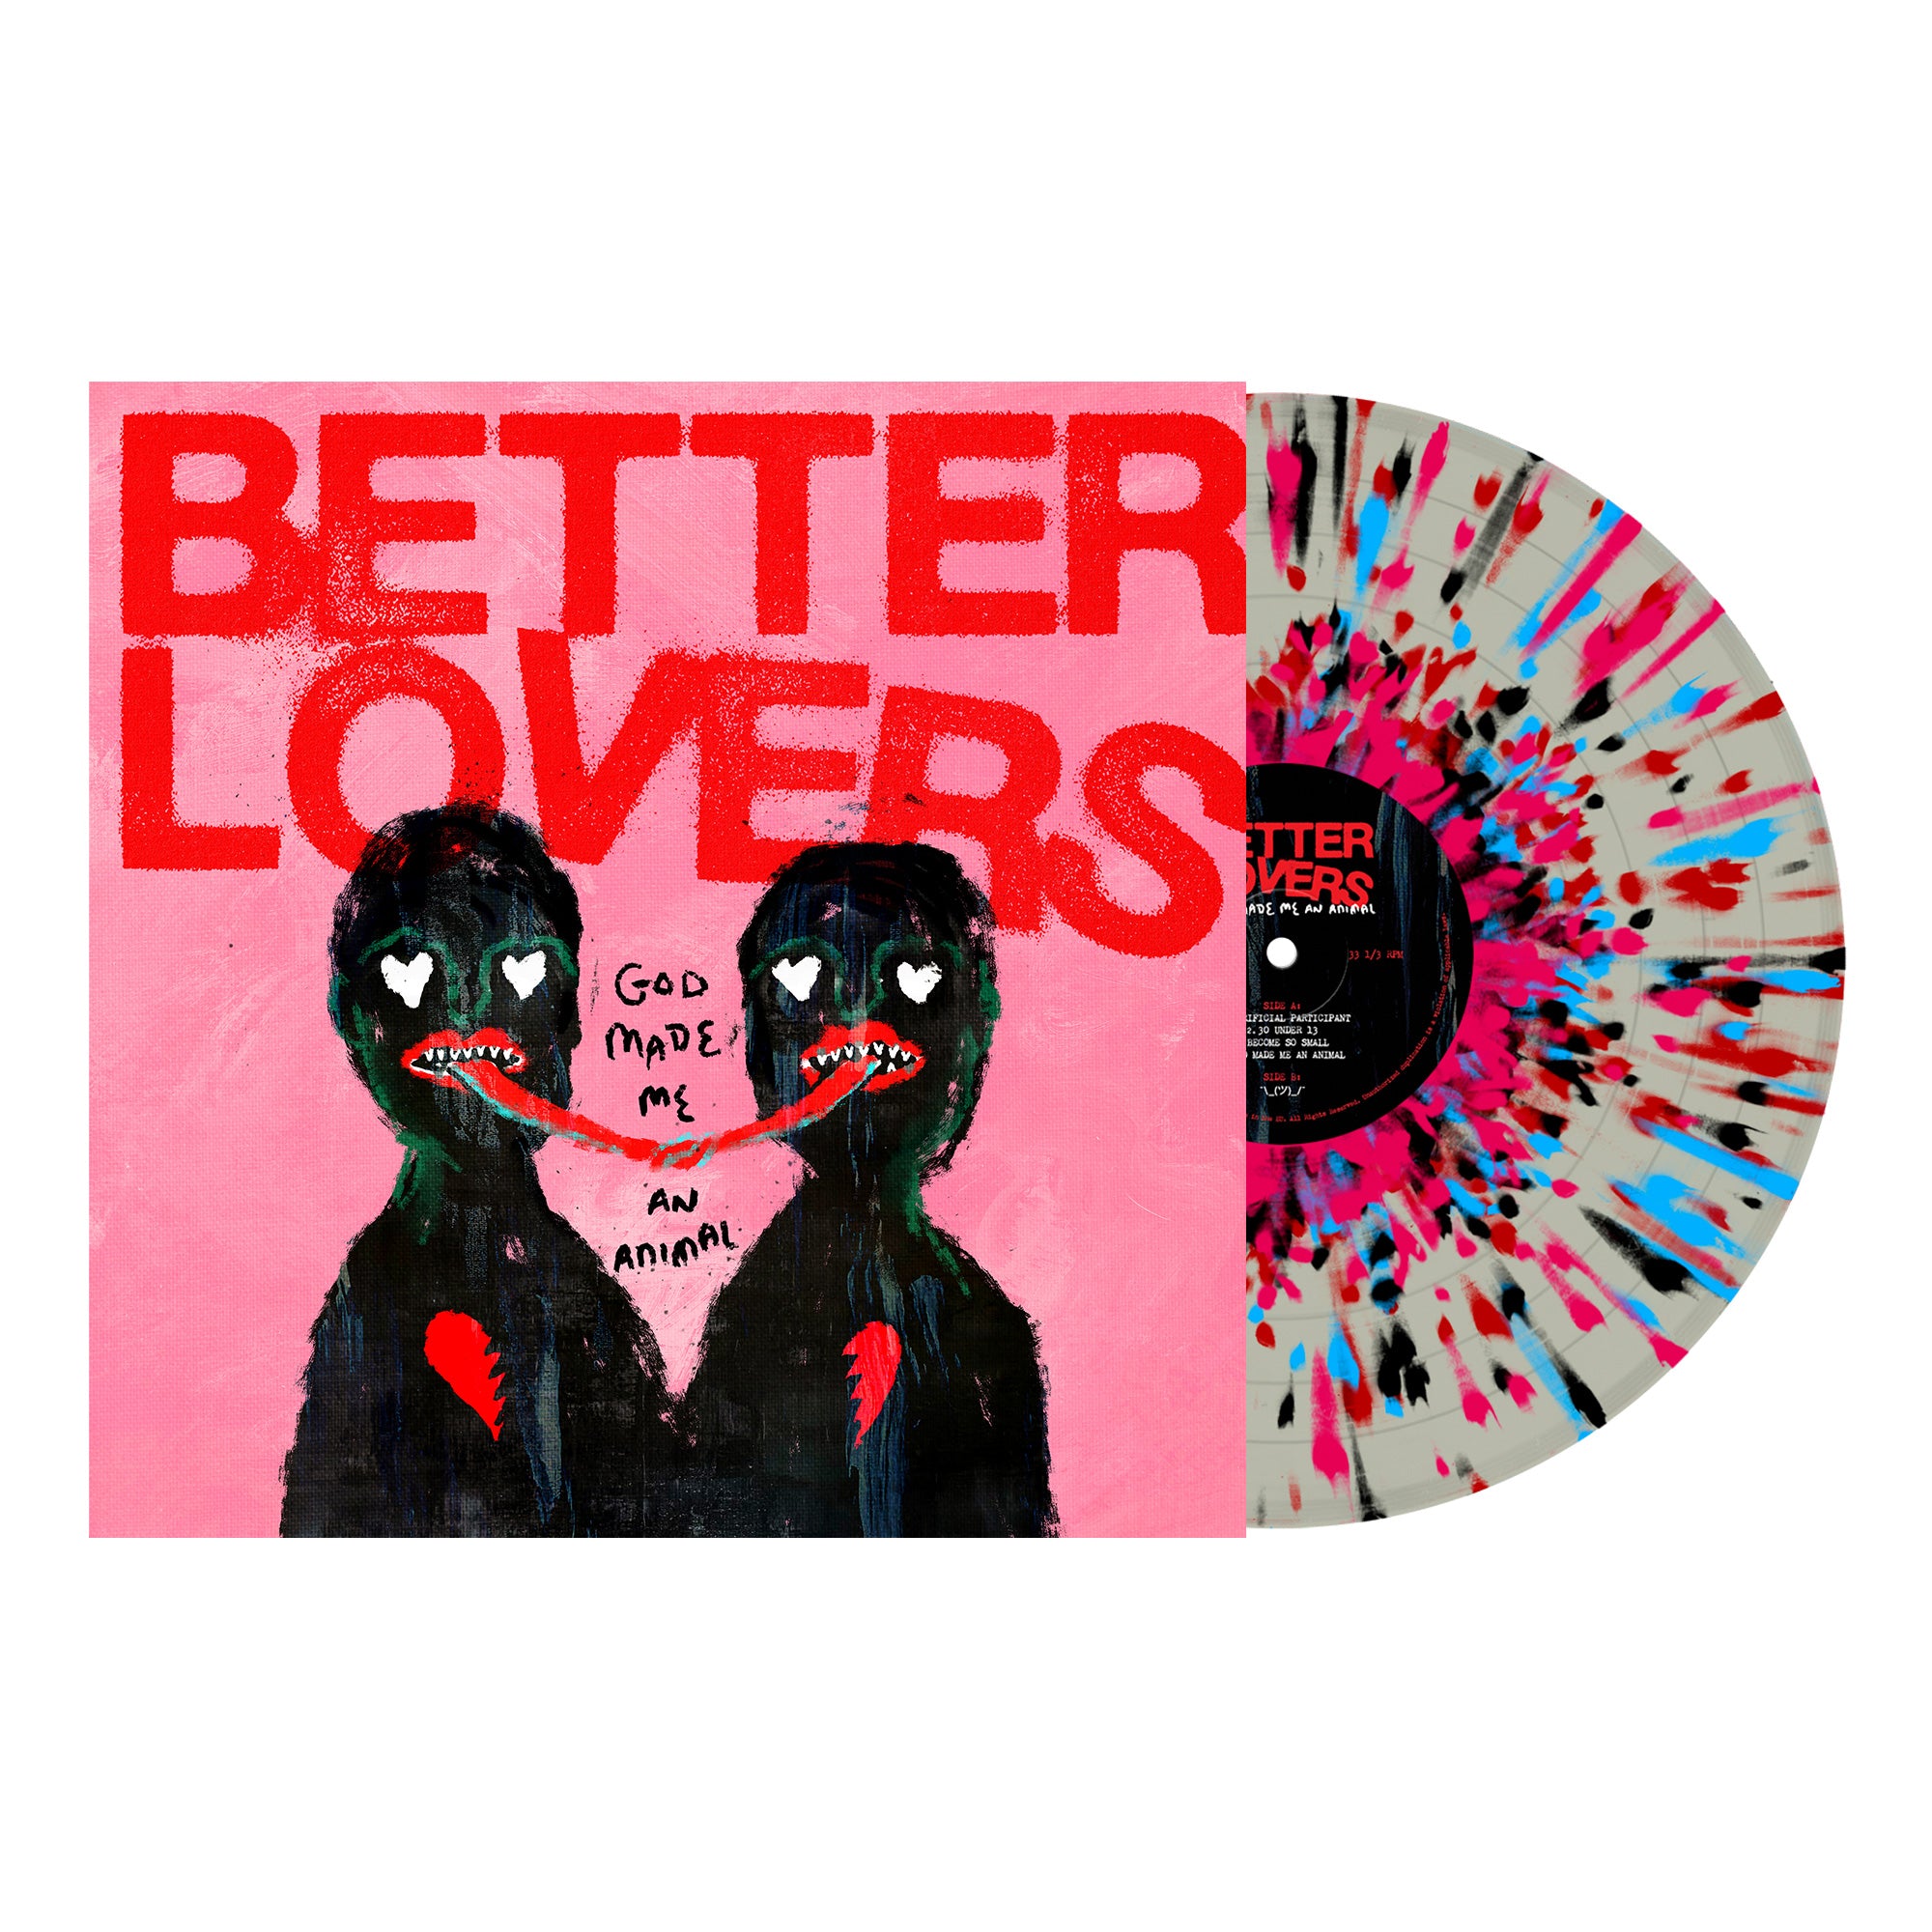 Better Lovers - 'God Made Me An Animal' White w/ Red, Turquoise, Black and Pink Splatter Vinyl